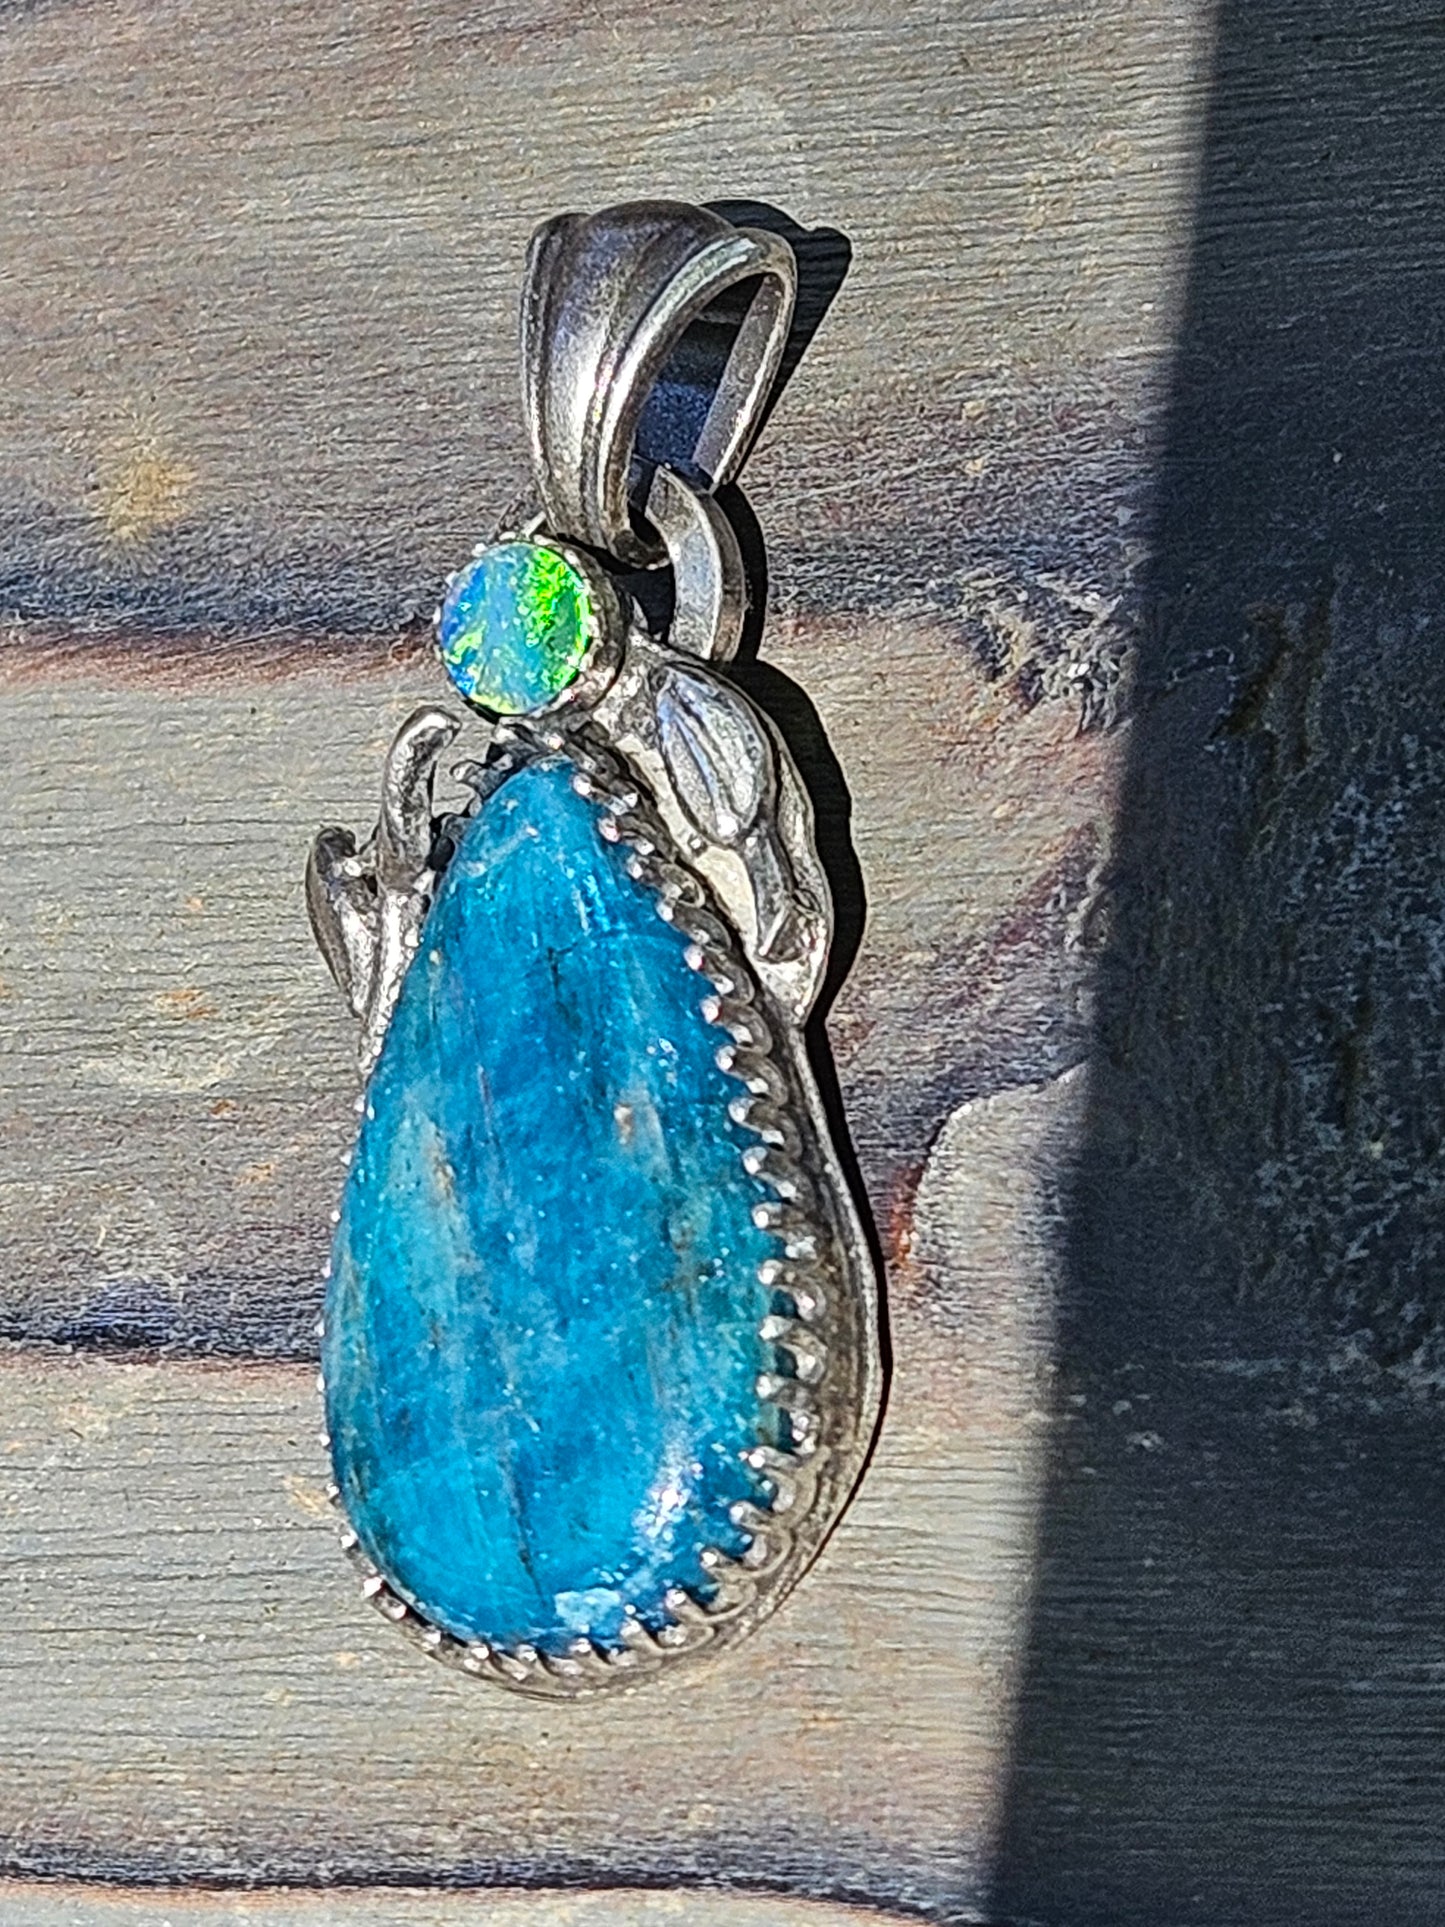 Blue Apatite and Australian Opal Pendant with Vines